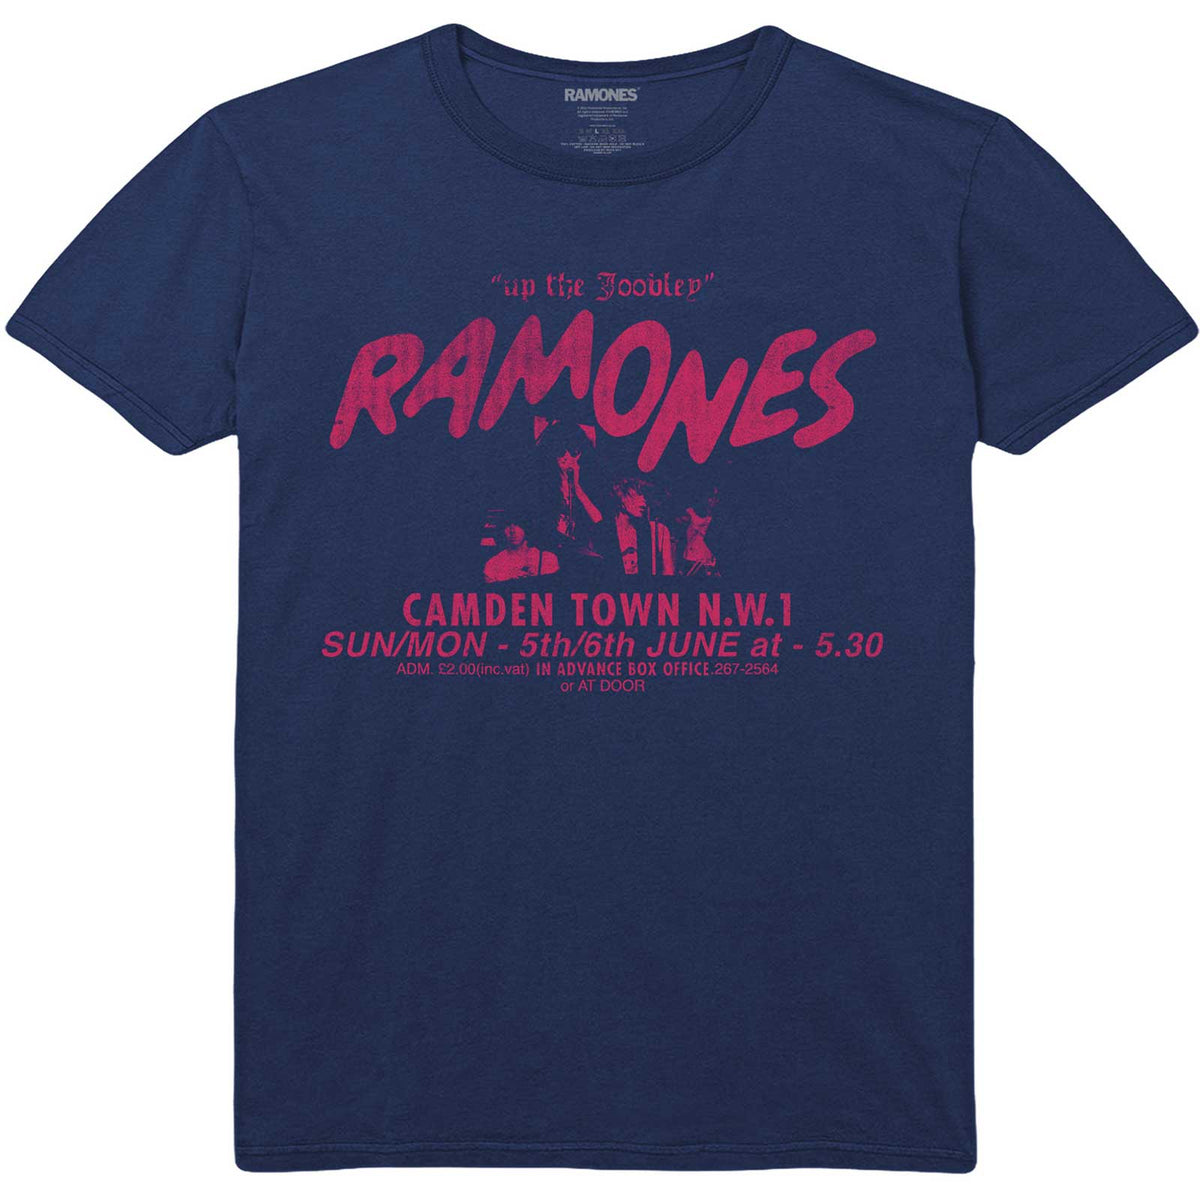 The Ramones Adult T-Shirt - Camden Roundhouse - Official Licensed Design